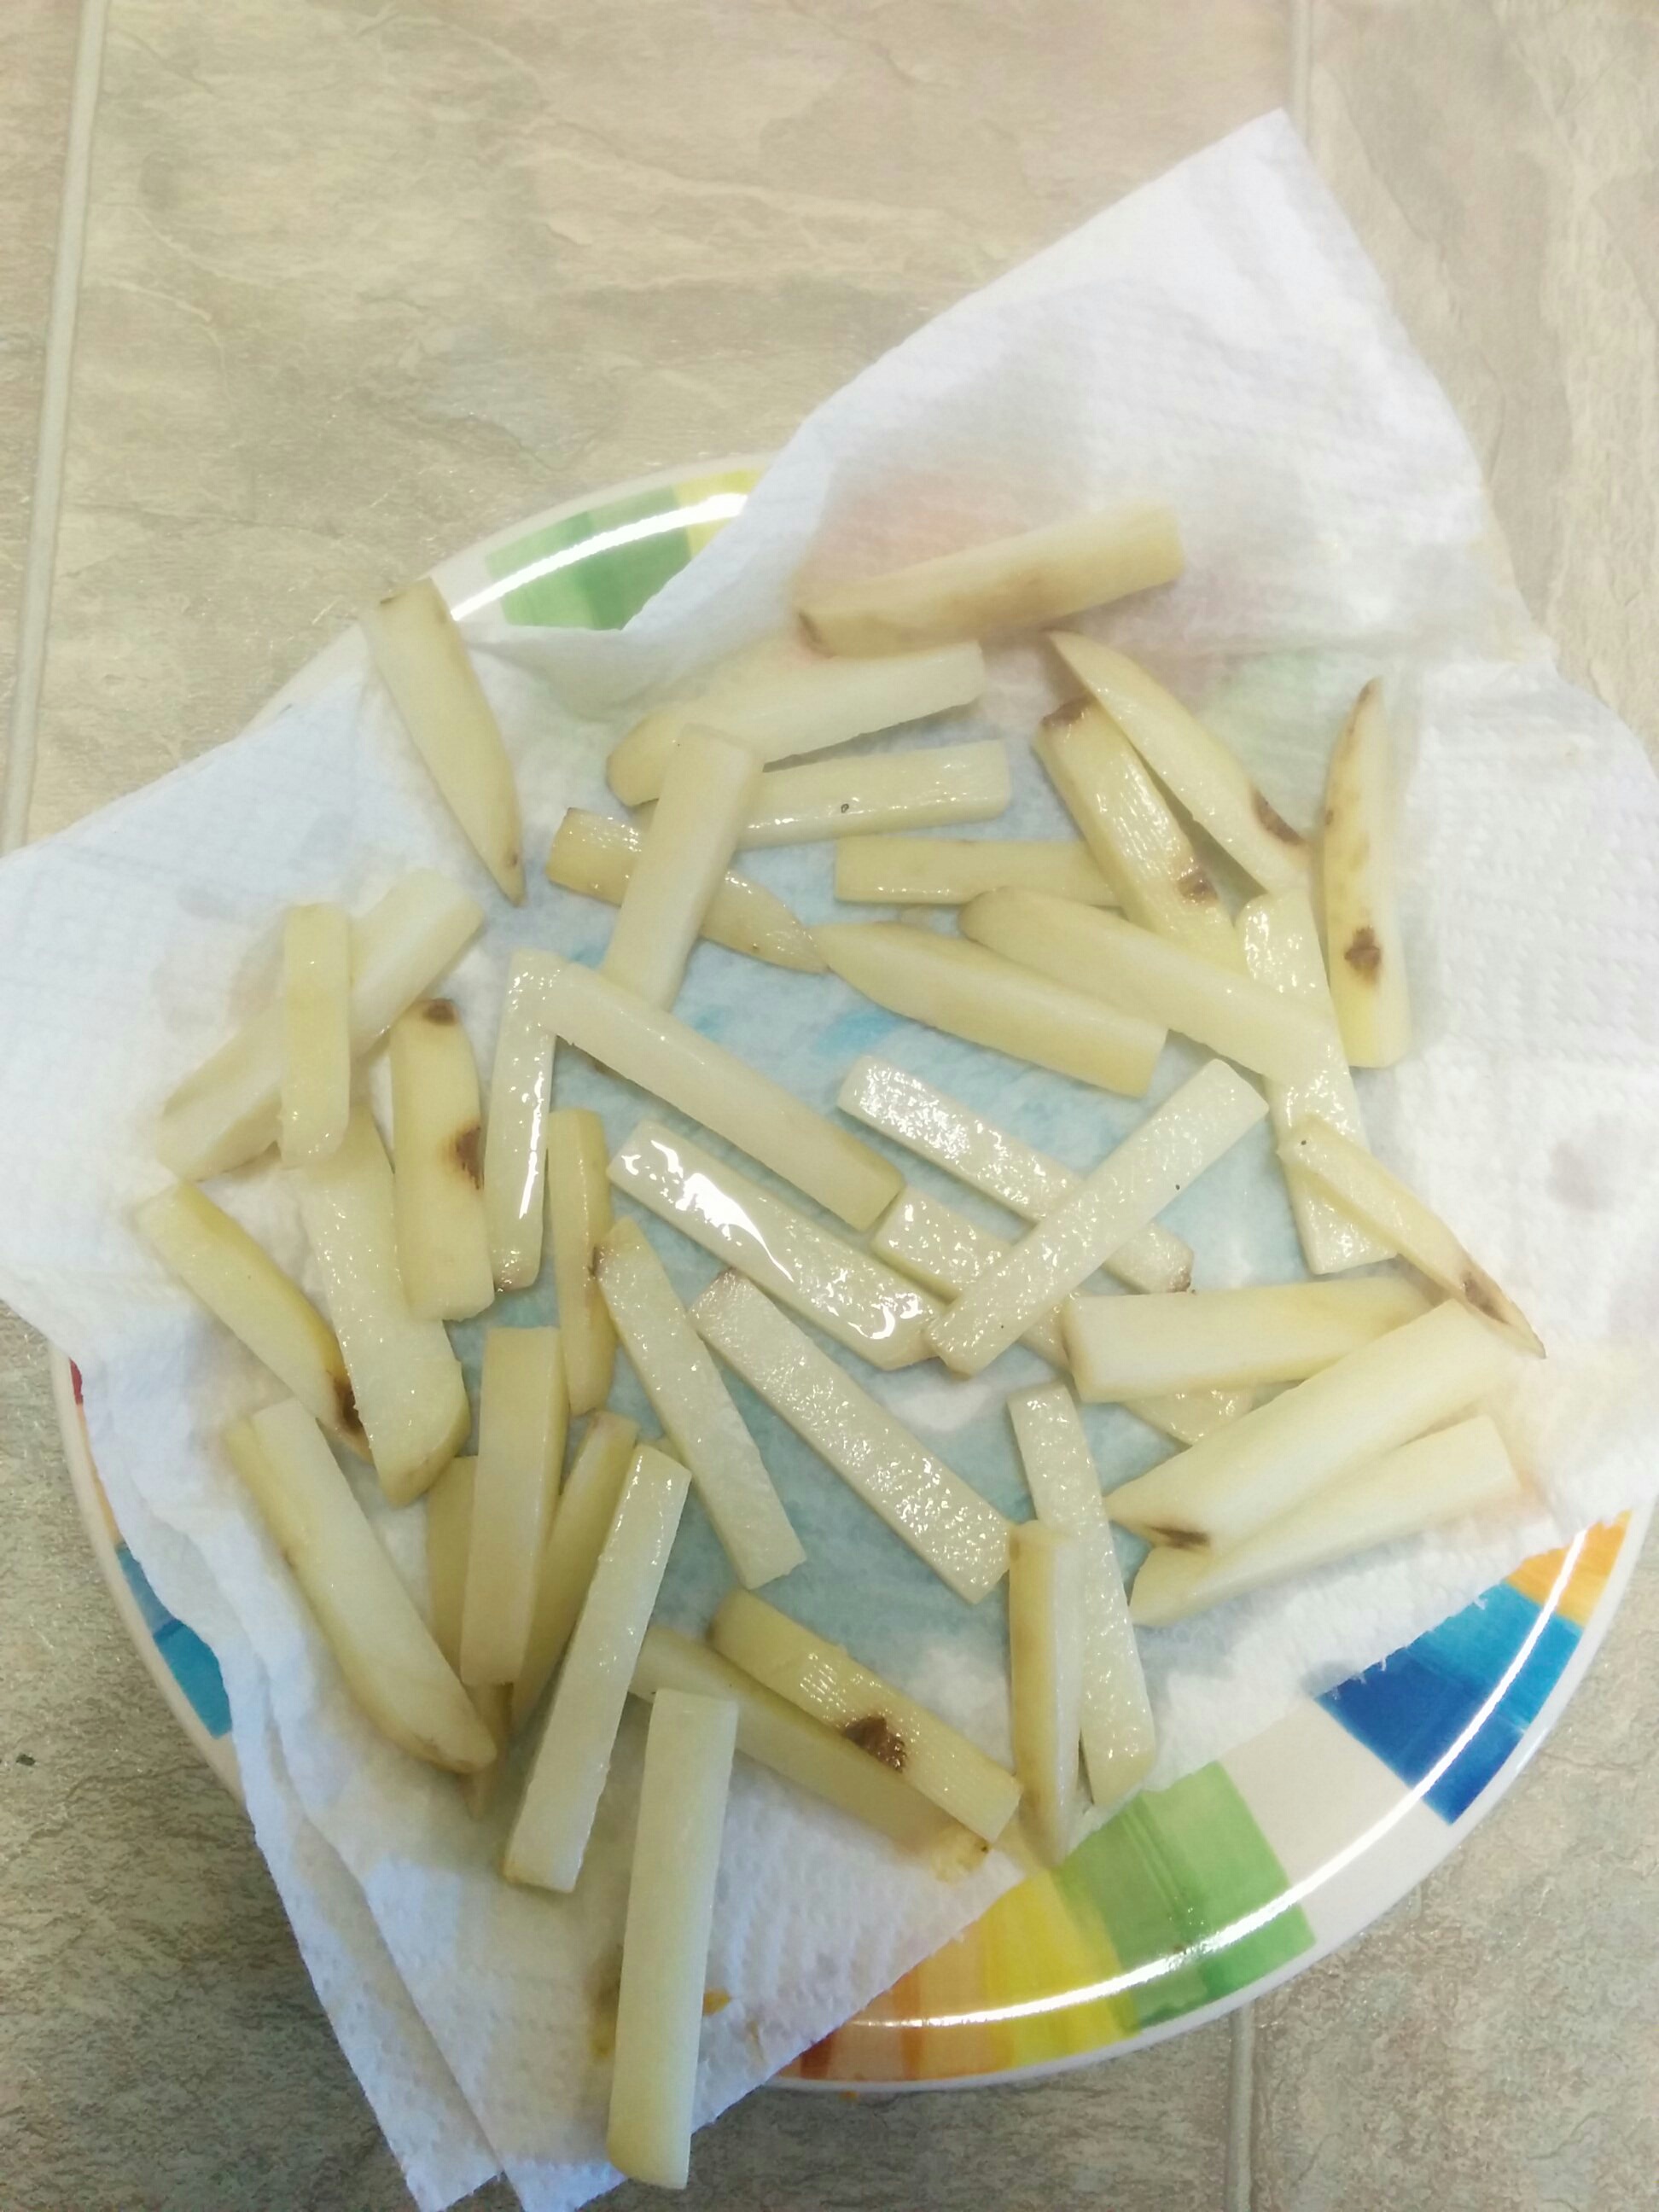 Fries after first fry